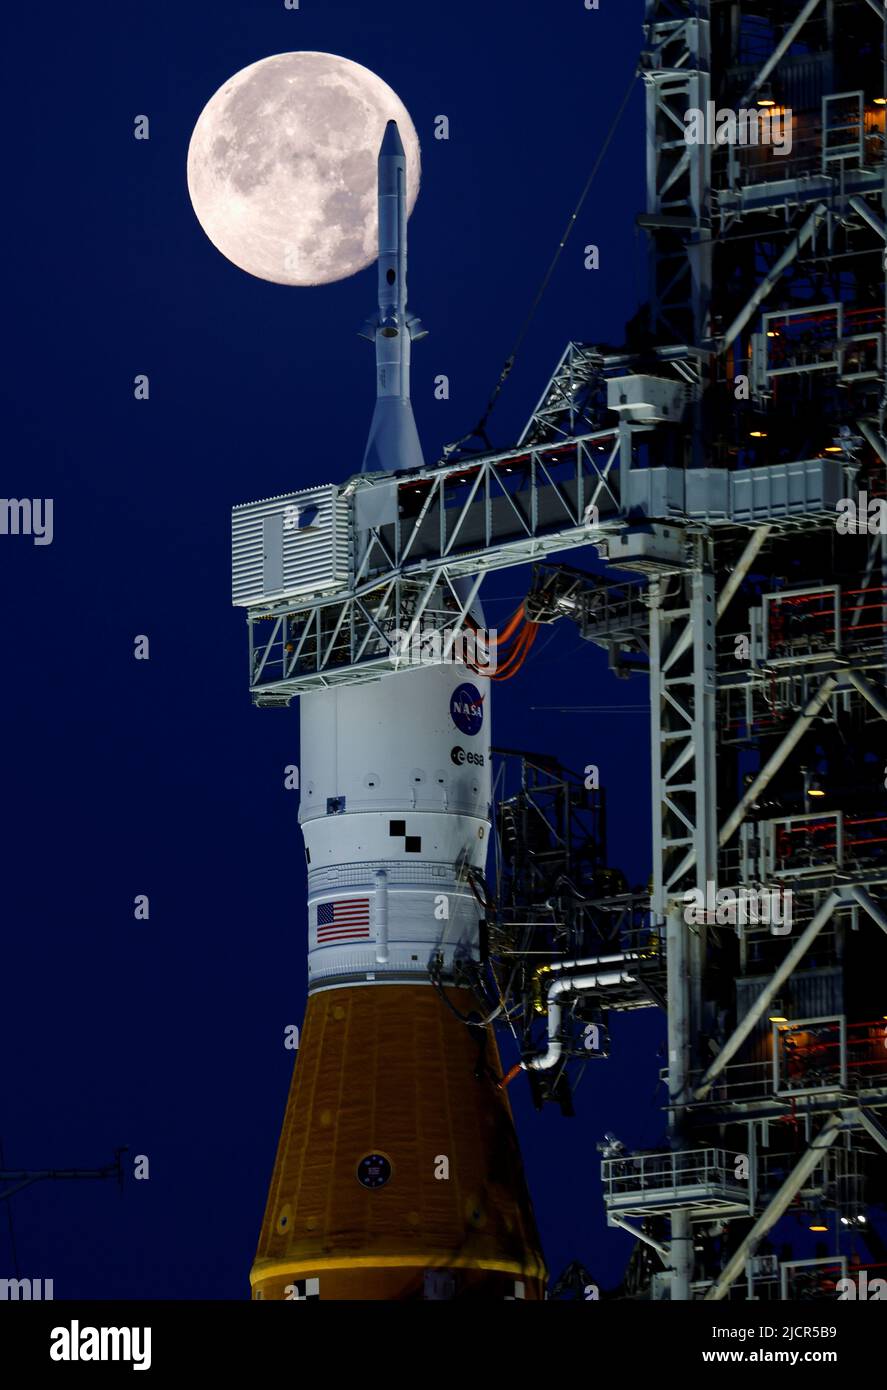 A full moon, known as the "Strawberry Moon" is shown with NASA’s next-generation moon rocket, the Space Launch System (SLS) Artemis 1, at the Kennedy Space Center in Cape Canaveral, Florida, U.S. June 15, 2022.